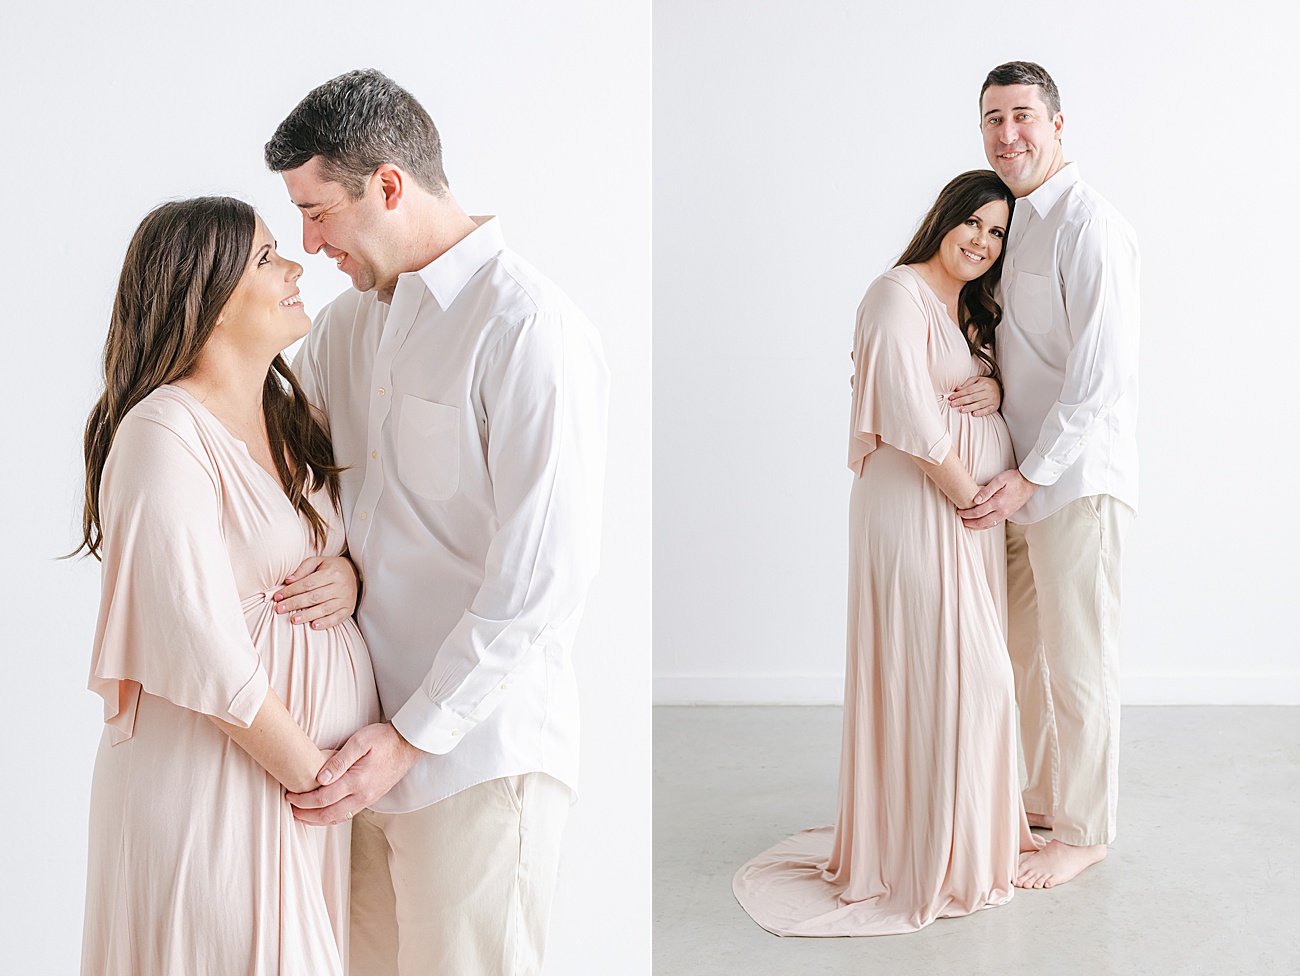 Sweet maternity portraits with Mom and Dad in neutral styling by Sana Ahmed Photography.